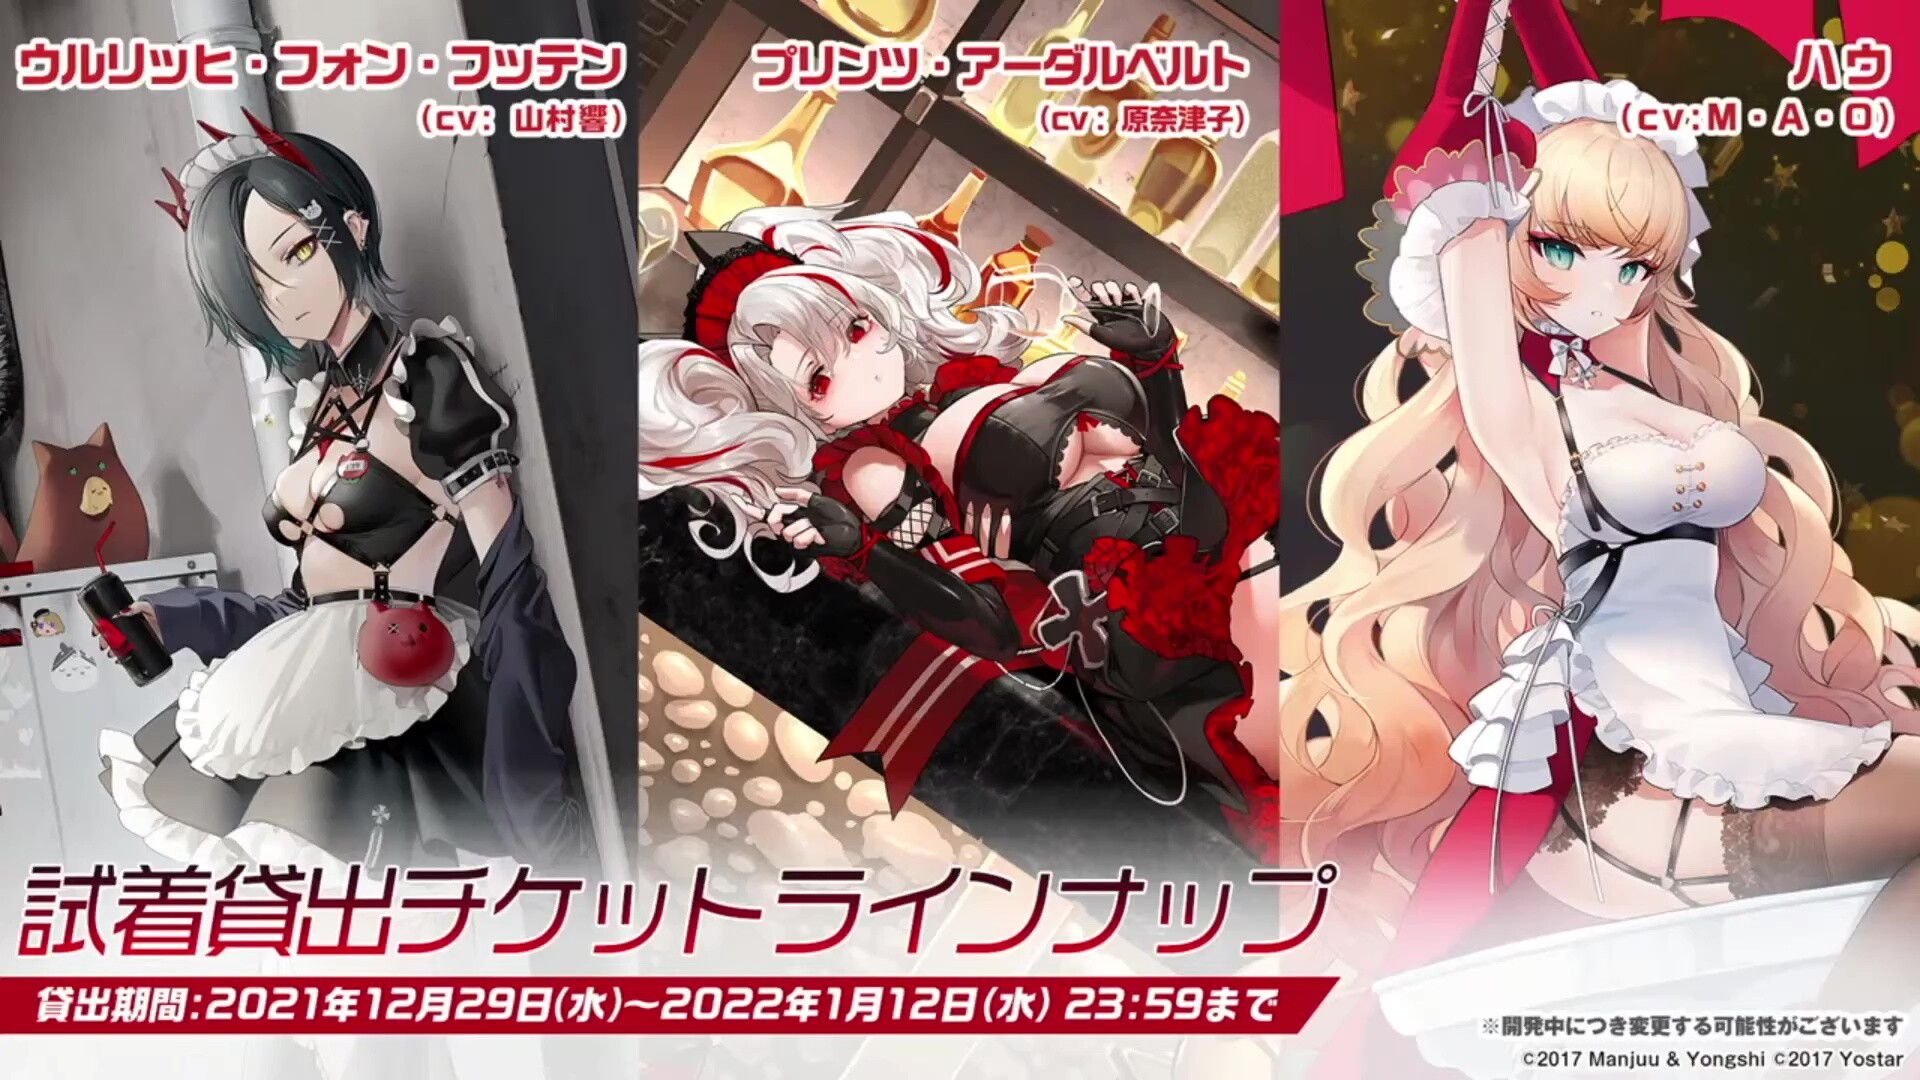 Erotic costumes such as "Azur Lane" erotic new character, whipmuchiro Santa and whipmuchi erotic maid clothes 33